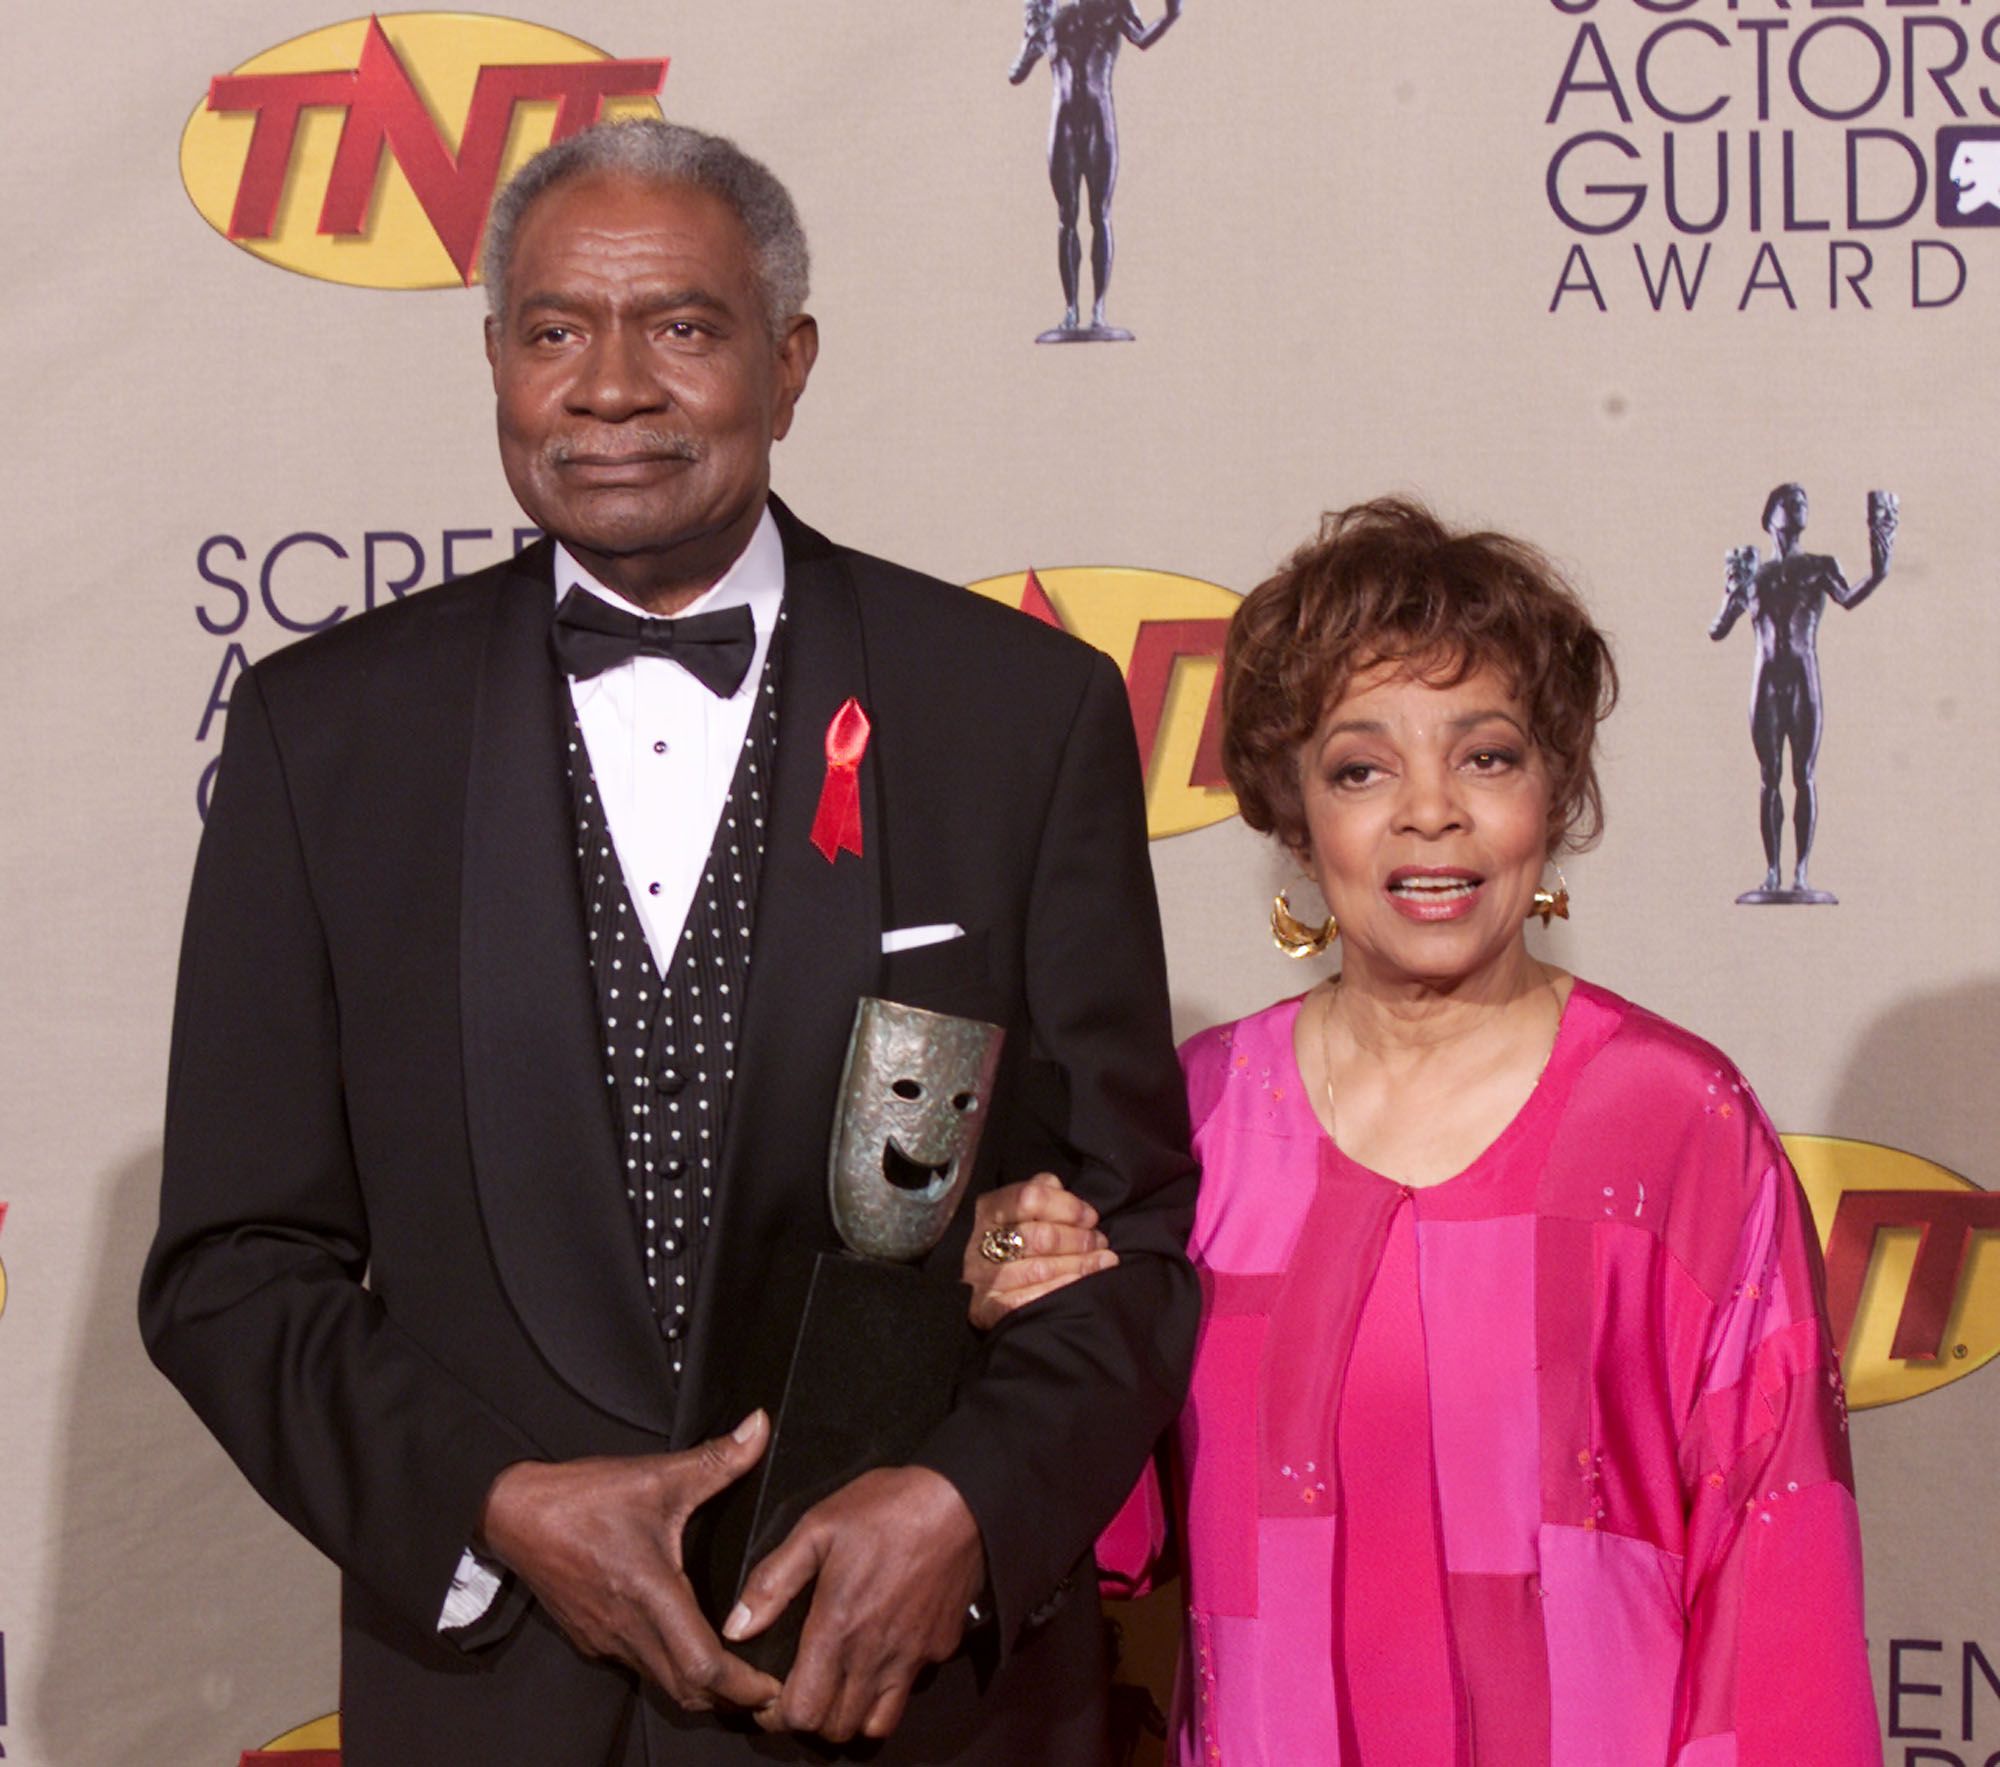 Ossie Davis and Ruby Dee backstage at the 7th Annual Screen Actors Guild Awards at the Shrine Auditorium on March 11, 2001 | Photo: Getty Images